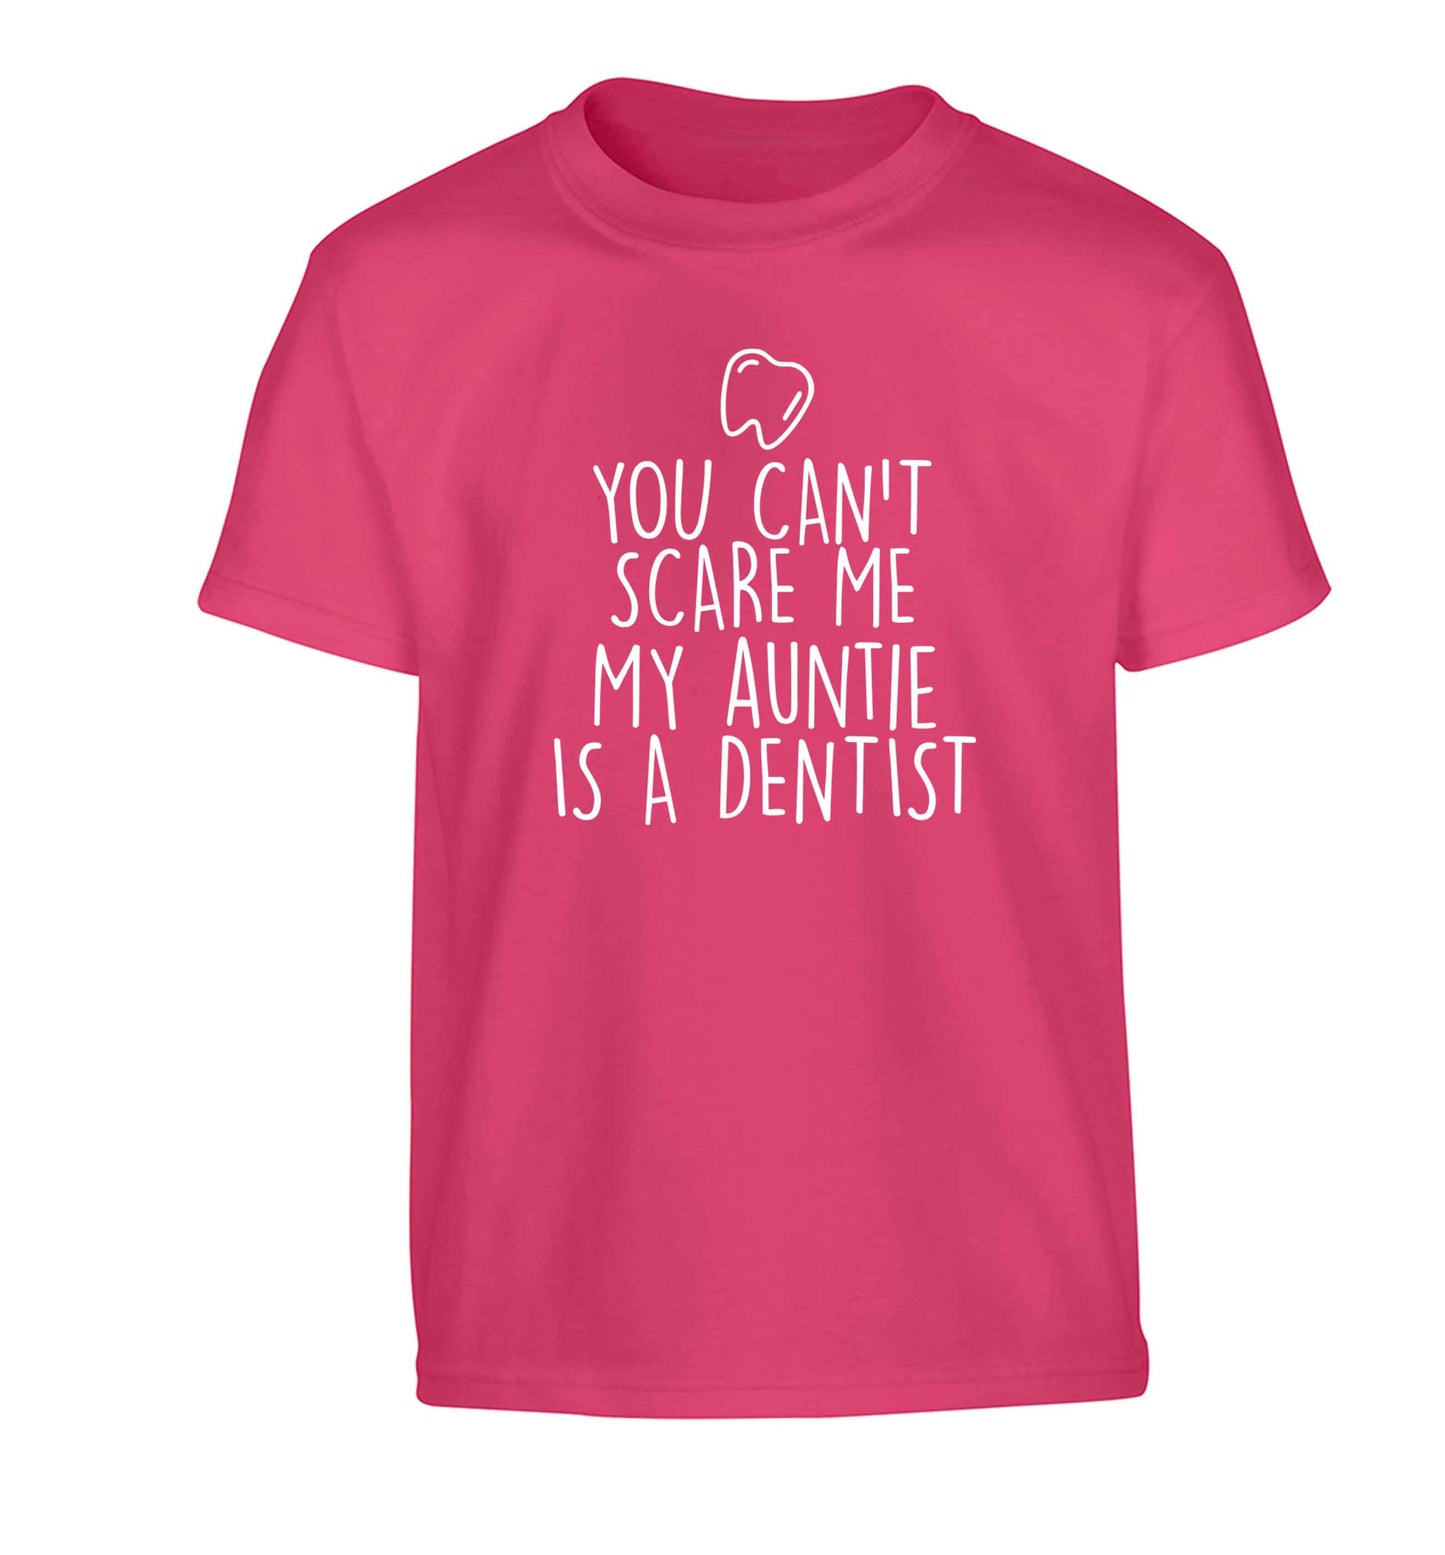 You can't scare me my auntie is a dentist Children's pink Tshirt 12-13 Years